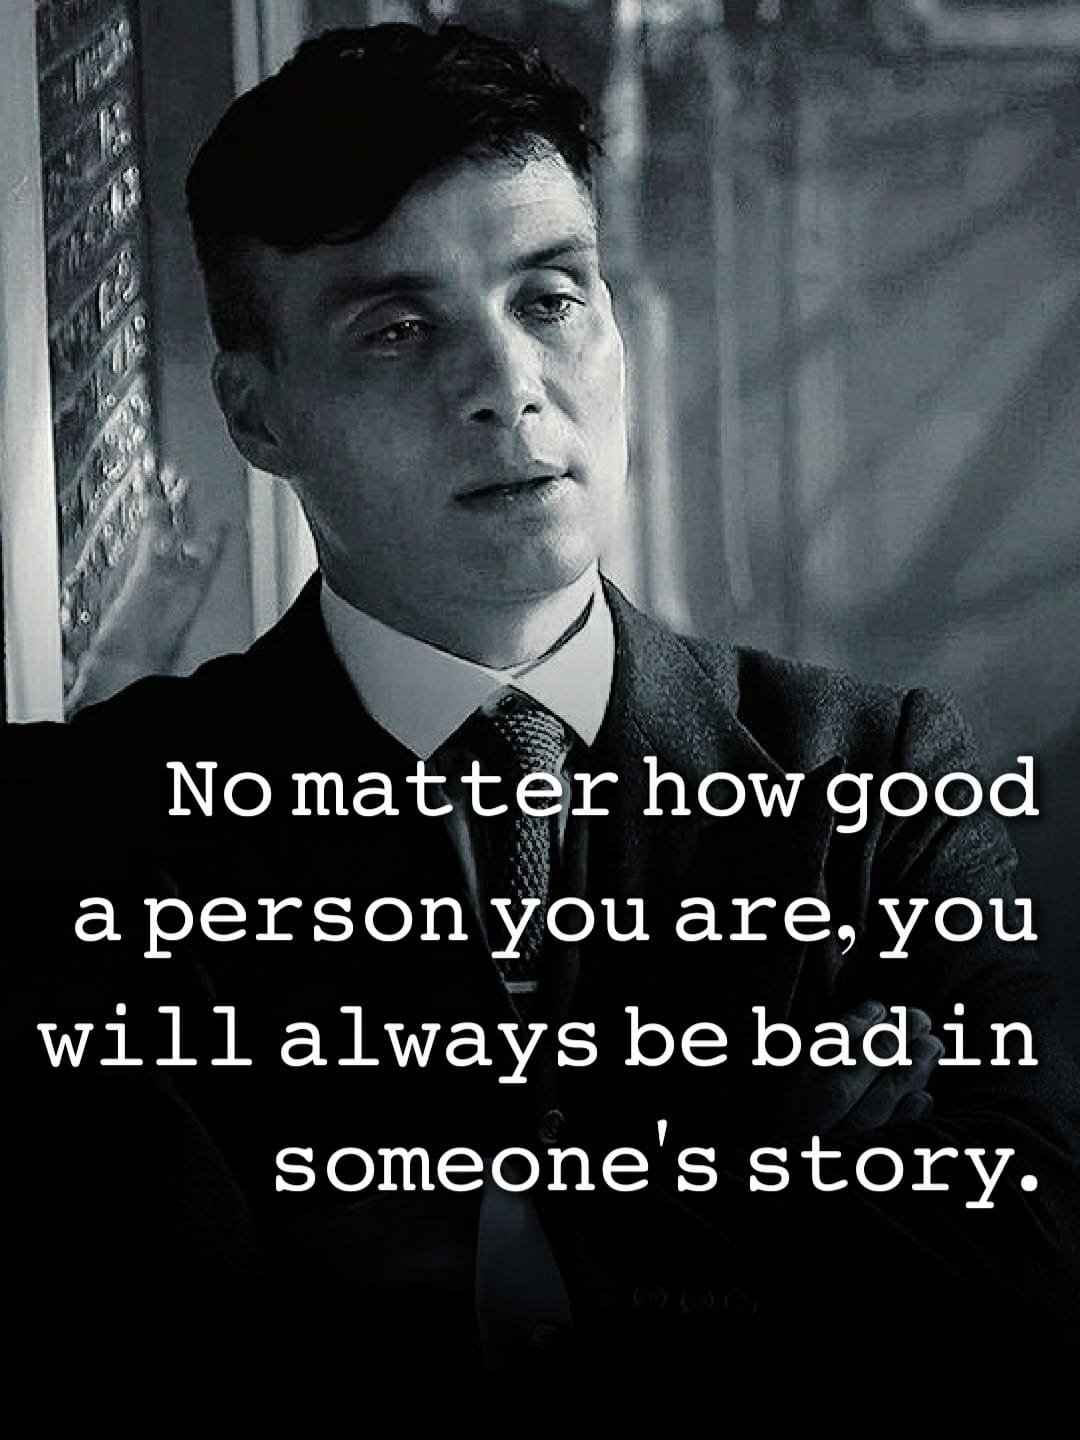 No matter how good a person you are, you are always bad in someone’s story.